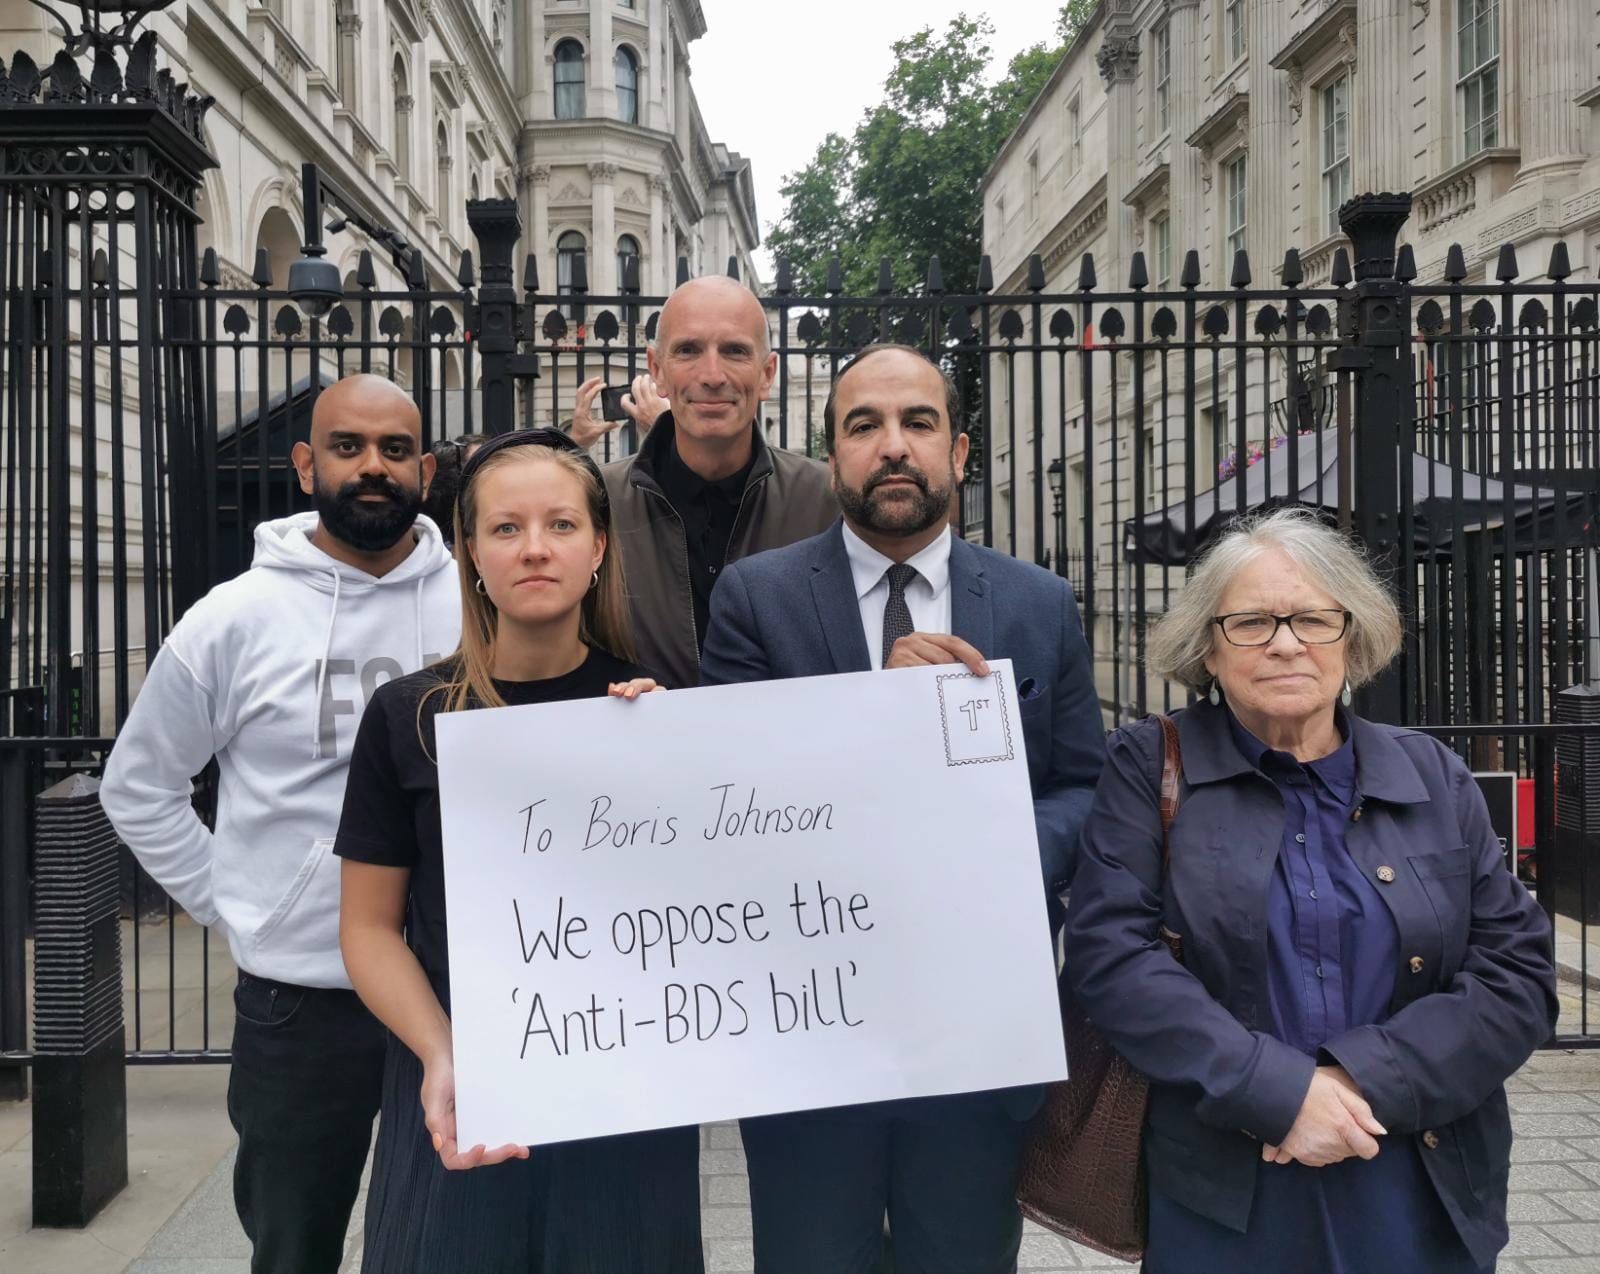 Anti-apartheid activists submit a petition to 10 Downing Street calling on the prime minister to scrap the anti-BDS Bill and instead protect the right to boycott in the UK [FOA]